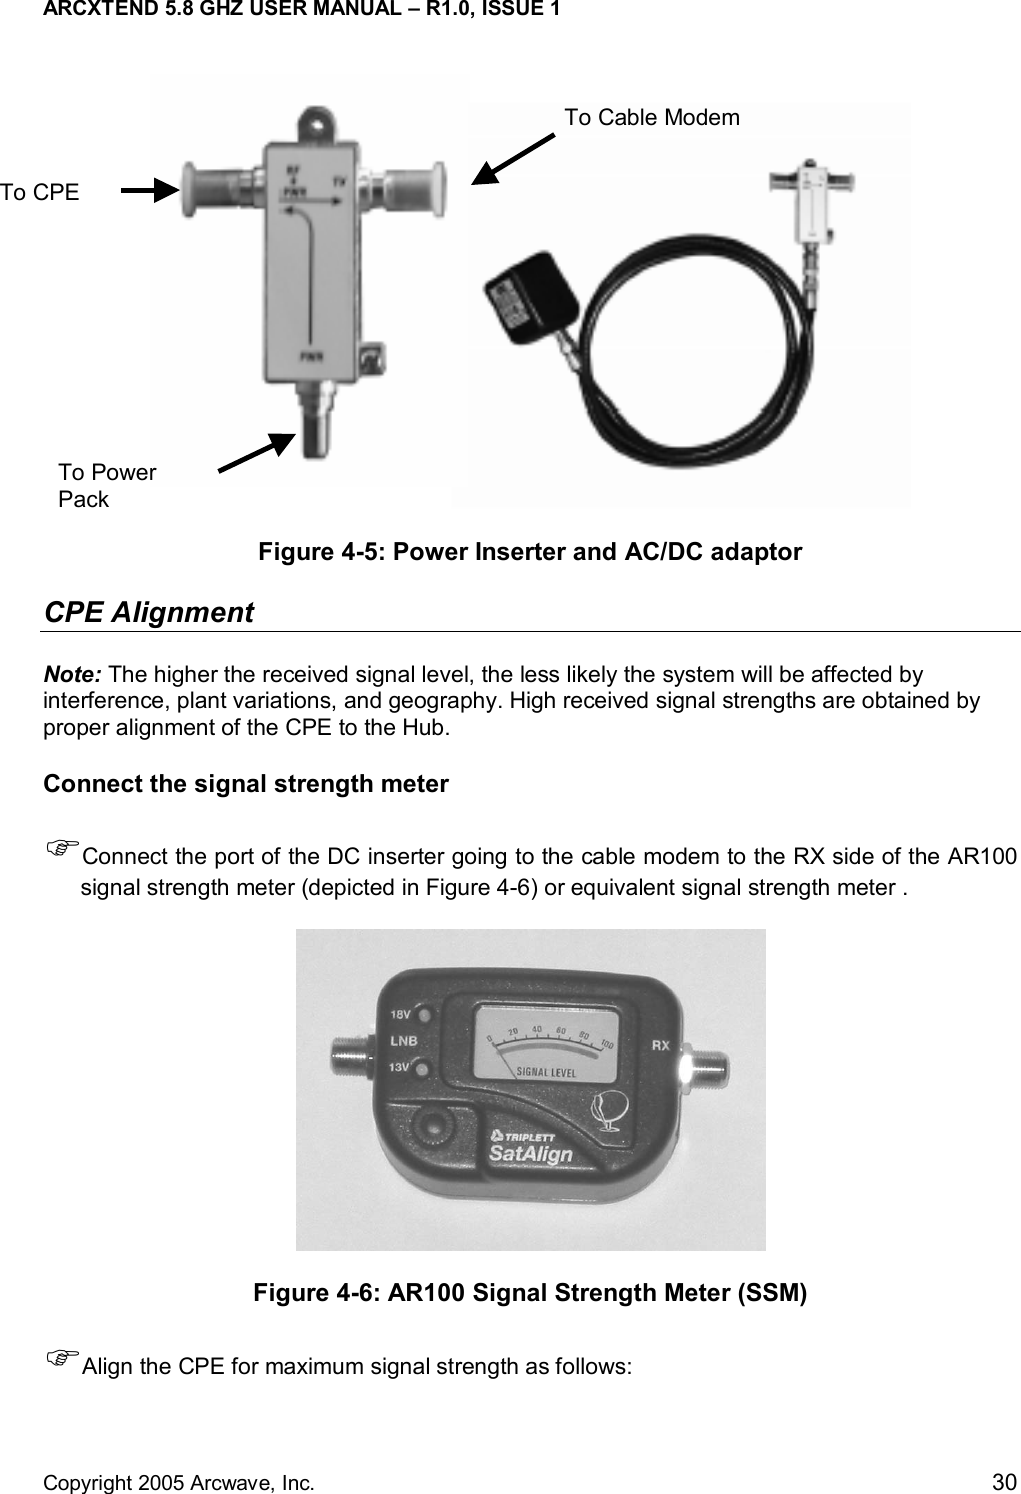 ARCXTEND 5.8 GHZ USER MANUAL – R1.0, ISSUE 1  Copyright 2005 Arcwave, Inc.    30  Figure 4-5: Power Inserter and AC/DC adaptor  CPE Alignment  Note: The higher the received signal level, the less likely the system will be affected by interference, plant variations, and geography. High received signal strengths are obtained by proper alignment of the CPE to the Hub. Connect the signal strength meter  )Connect the port of the DC inserter going to the cable modem to the RX side of the AR100 signal strength meter (depicted in Figure 4-6) or equivalent signal strength meter .   Figure 4-6: AR100 Signal Strength Meter (SSM) )Align the CPE for maximum signal strength as follows: To CPE  To Cable ModemTo Power Pack 